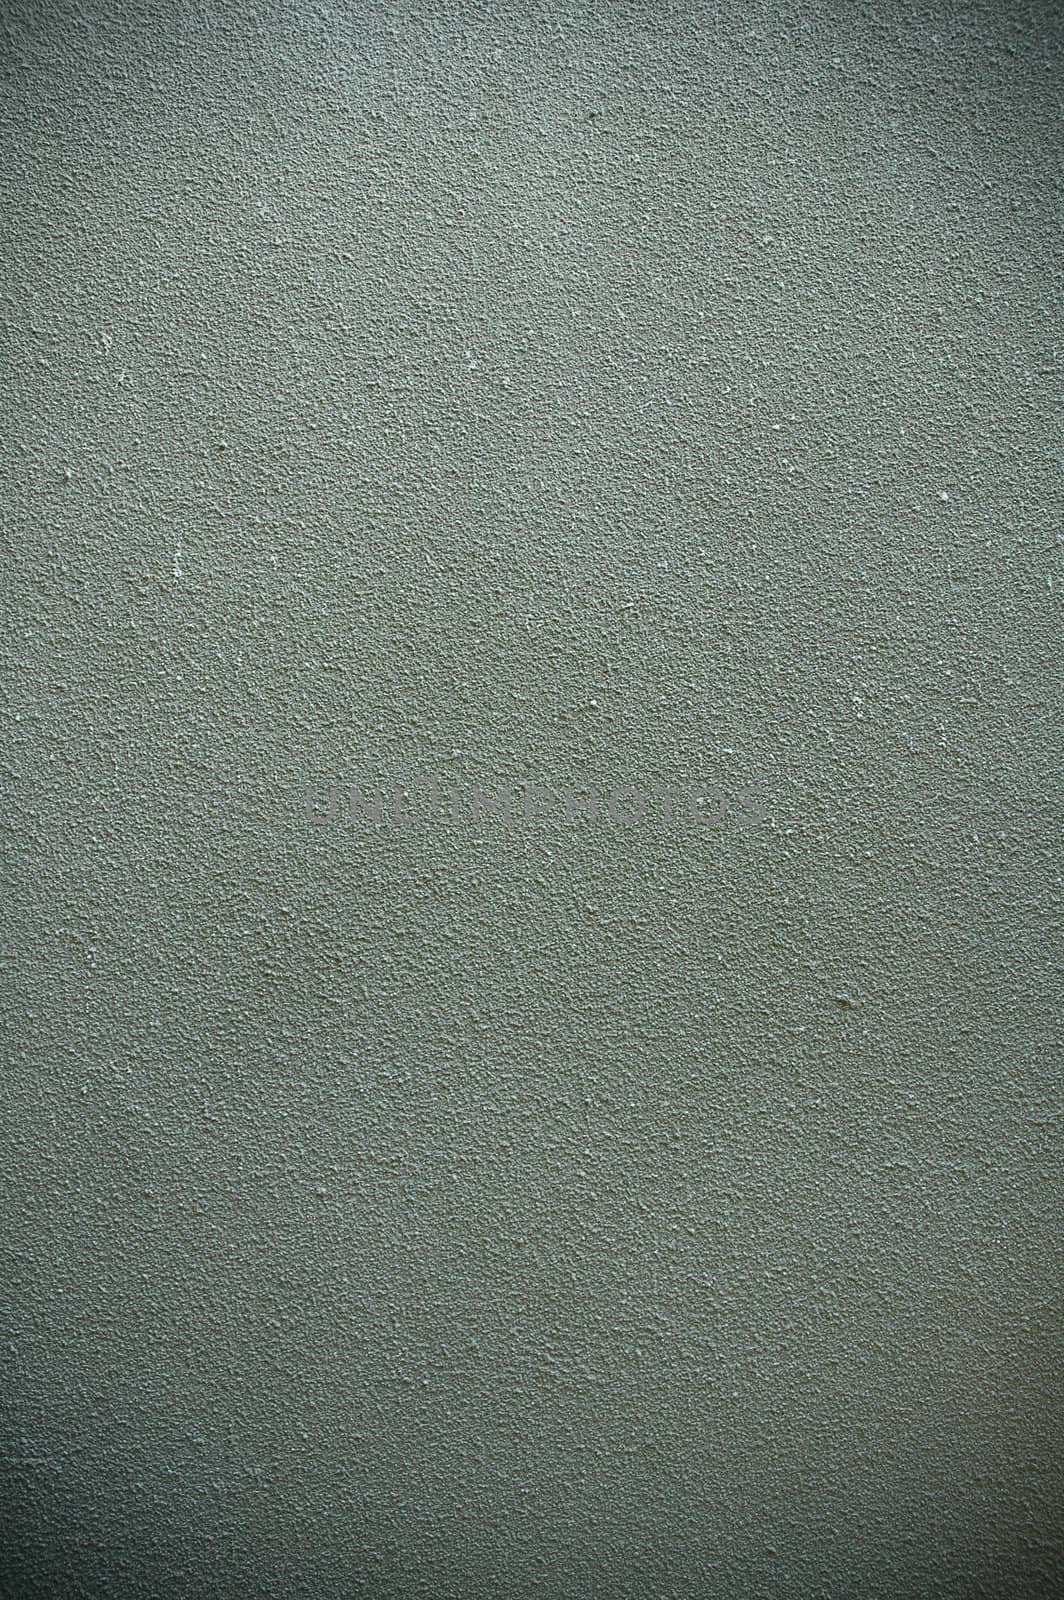 textured of concrete wall